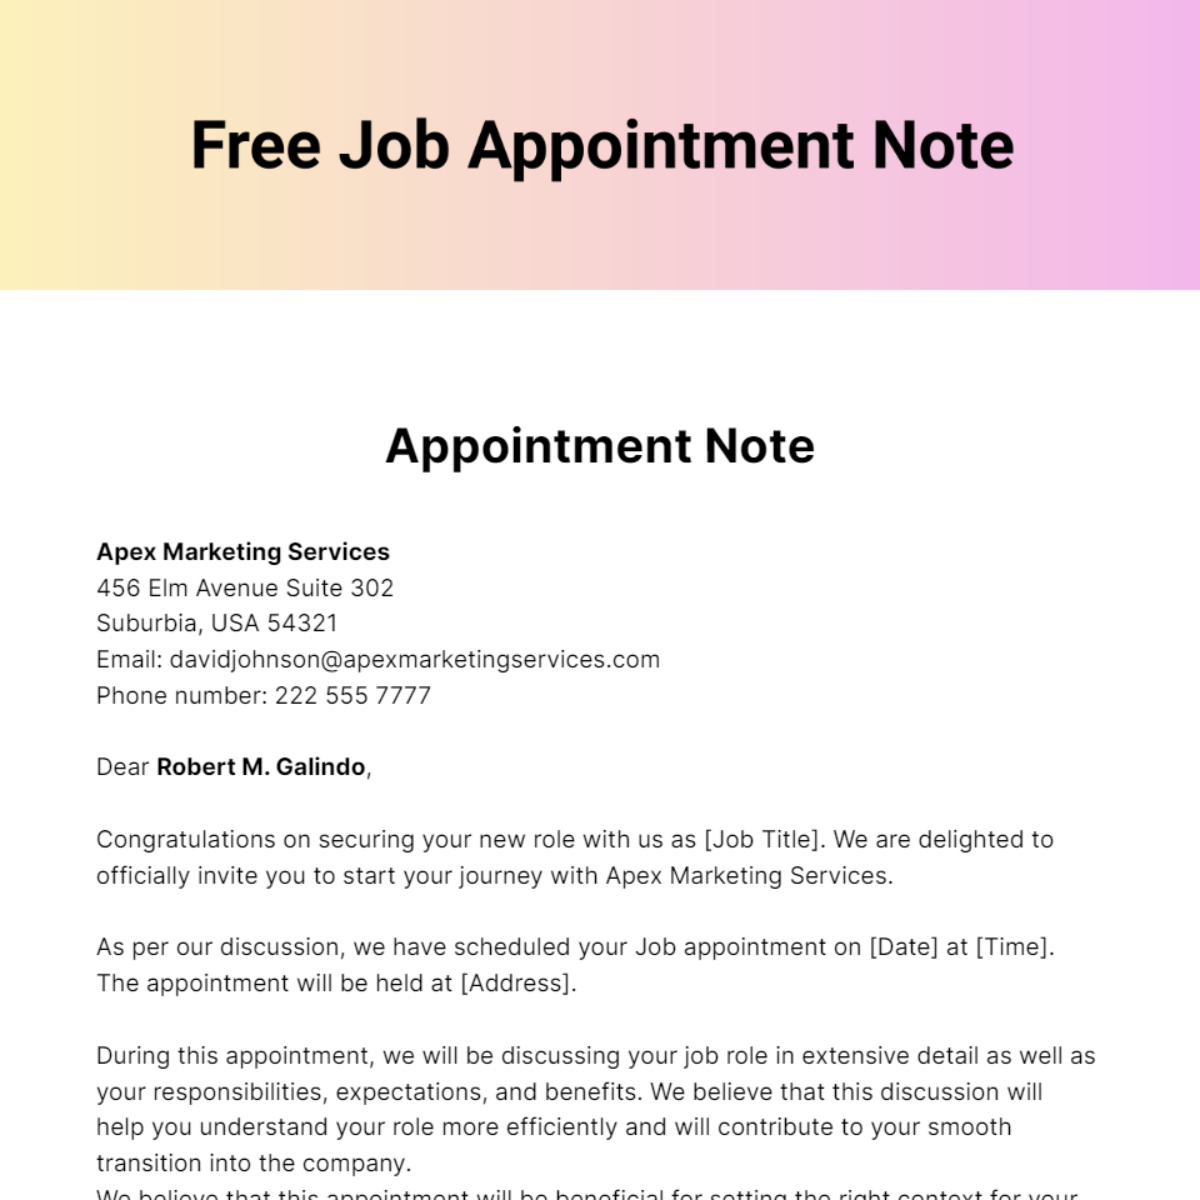 Free Job Appointment Note Template